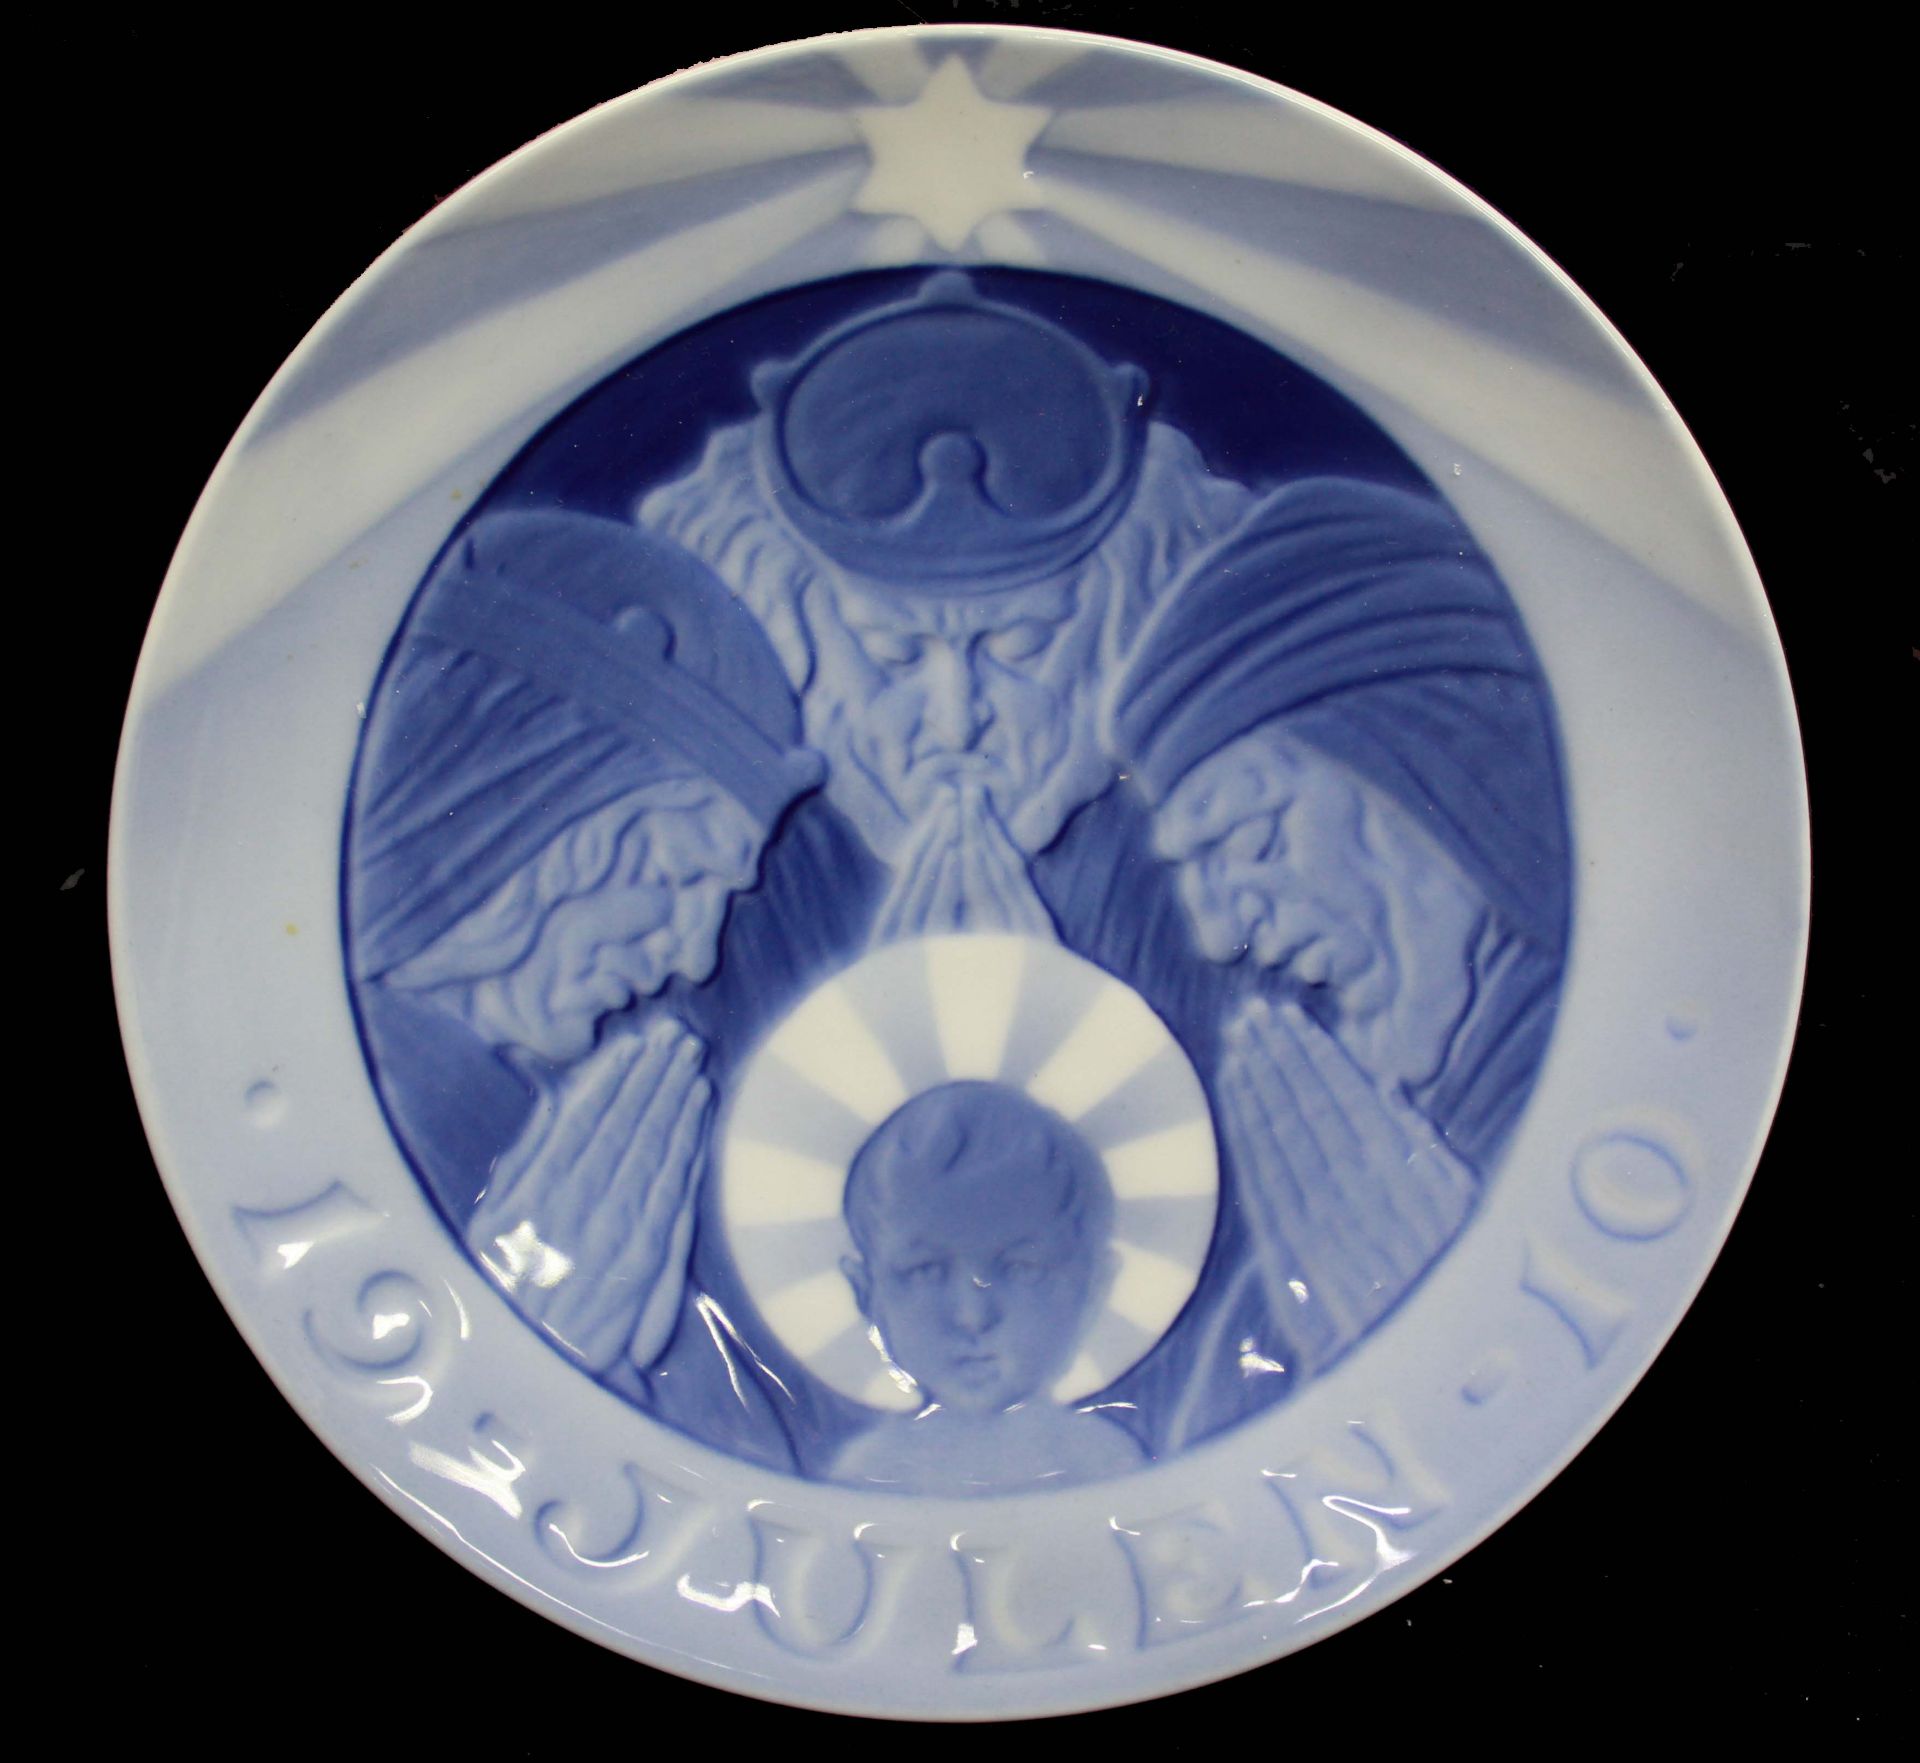 94 Christmas plates - Royal Copenhagen. Complete series from 1910-2004. - Image 16 of 28